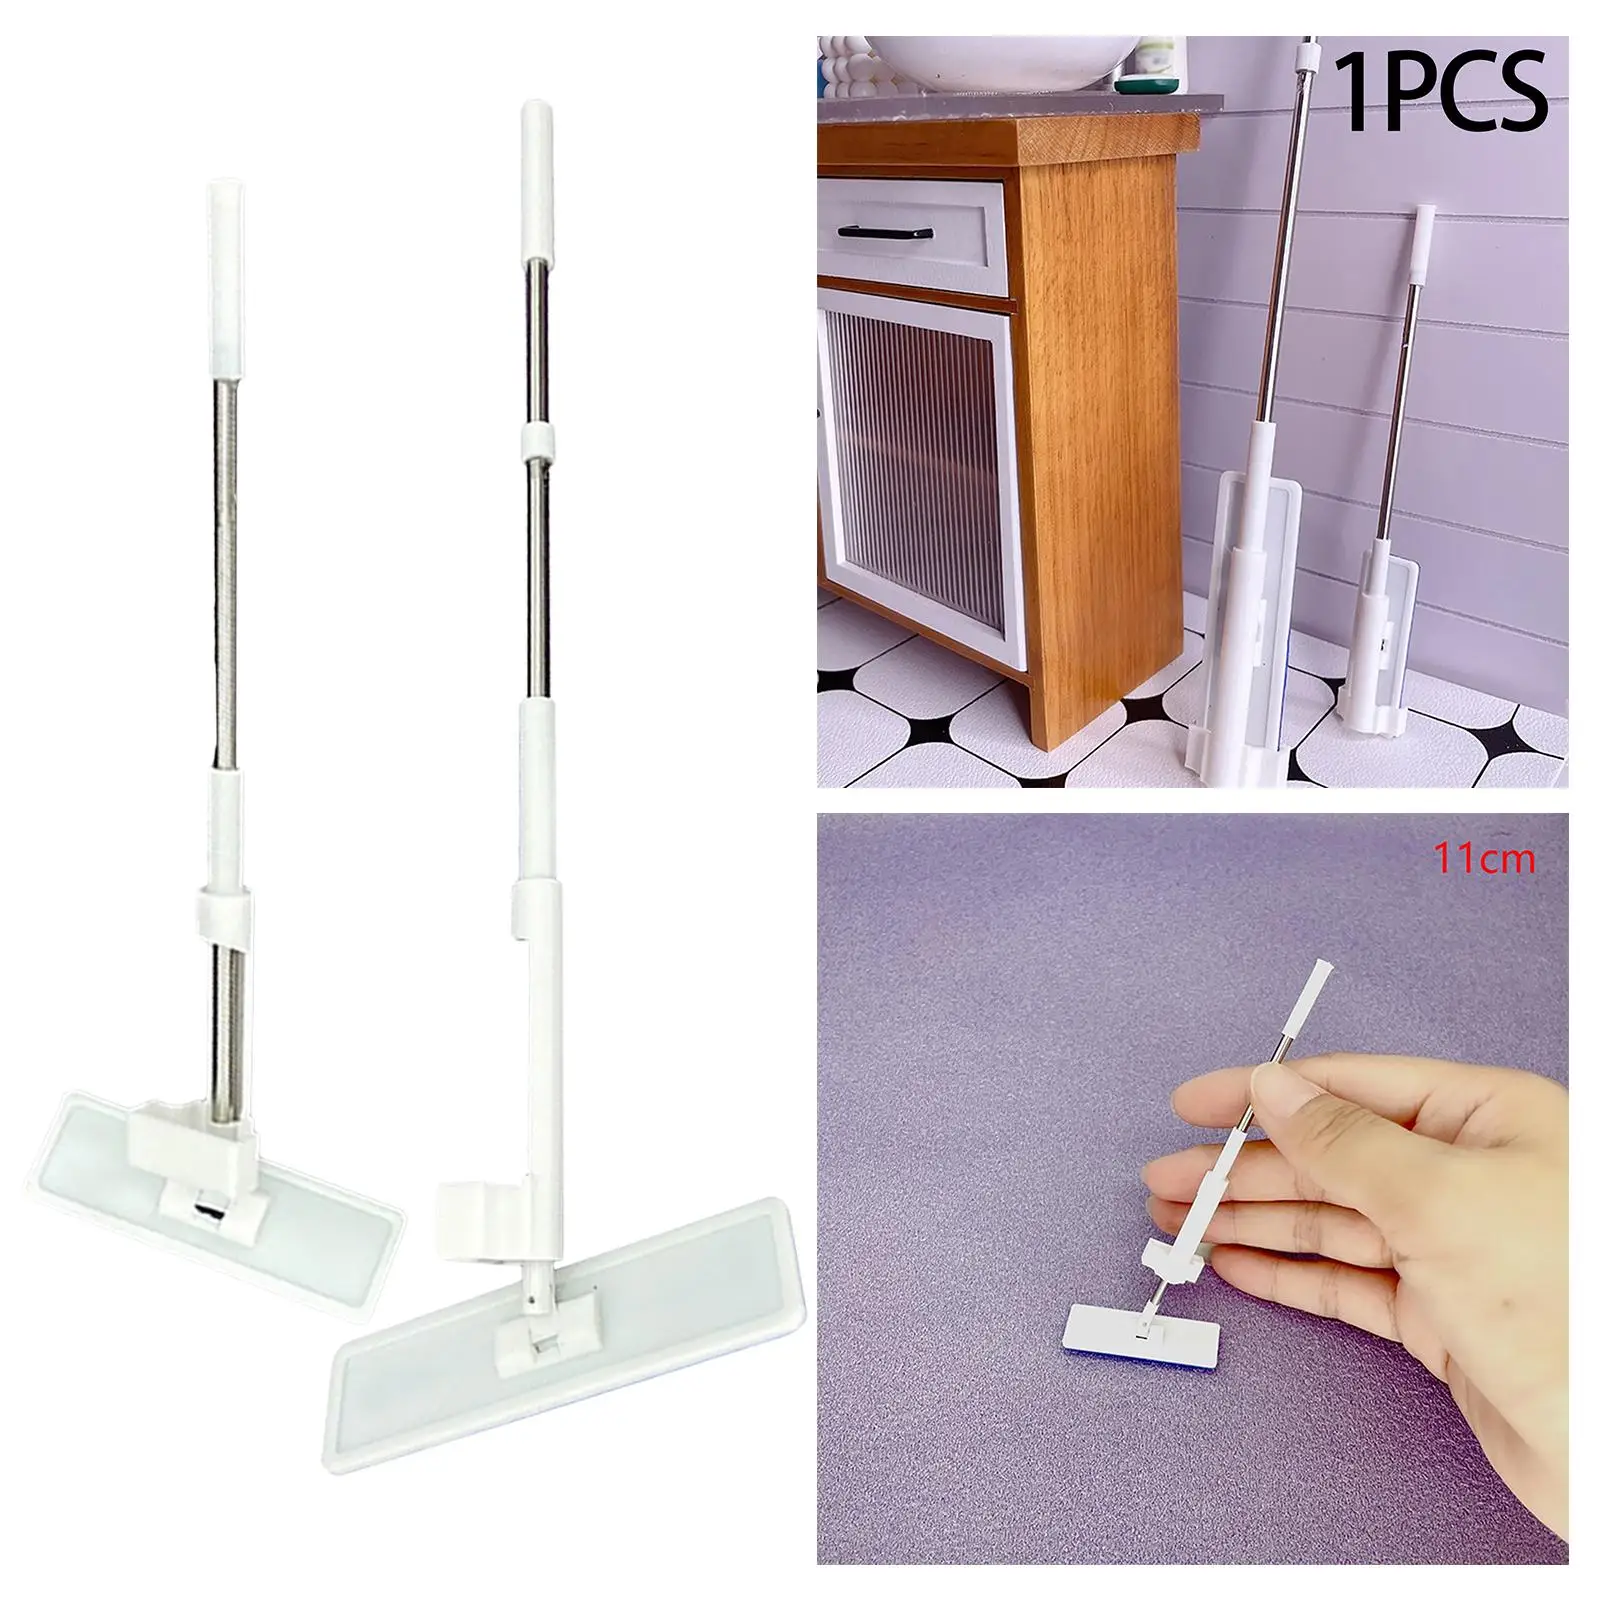 1/12 Mini Cleaning Tool Dollhouse Miniature Mop for Doll House Decors Floor Cleaning Microfiber Mop for Living Room Bathroom